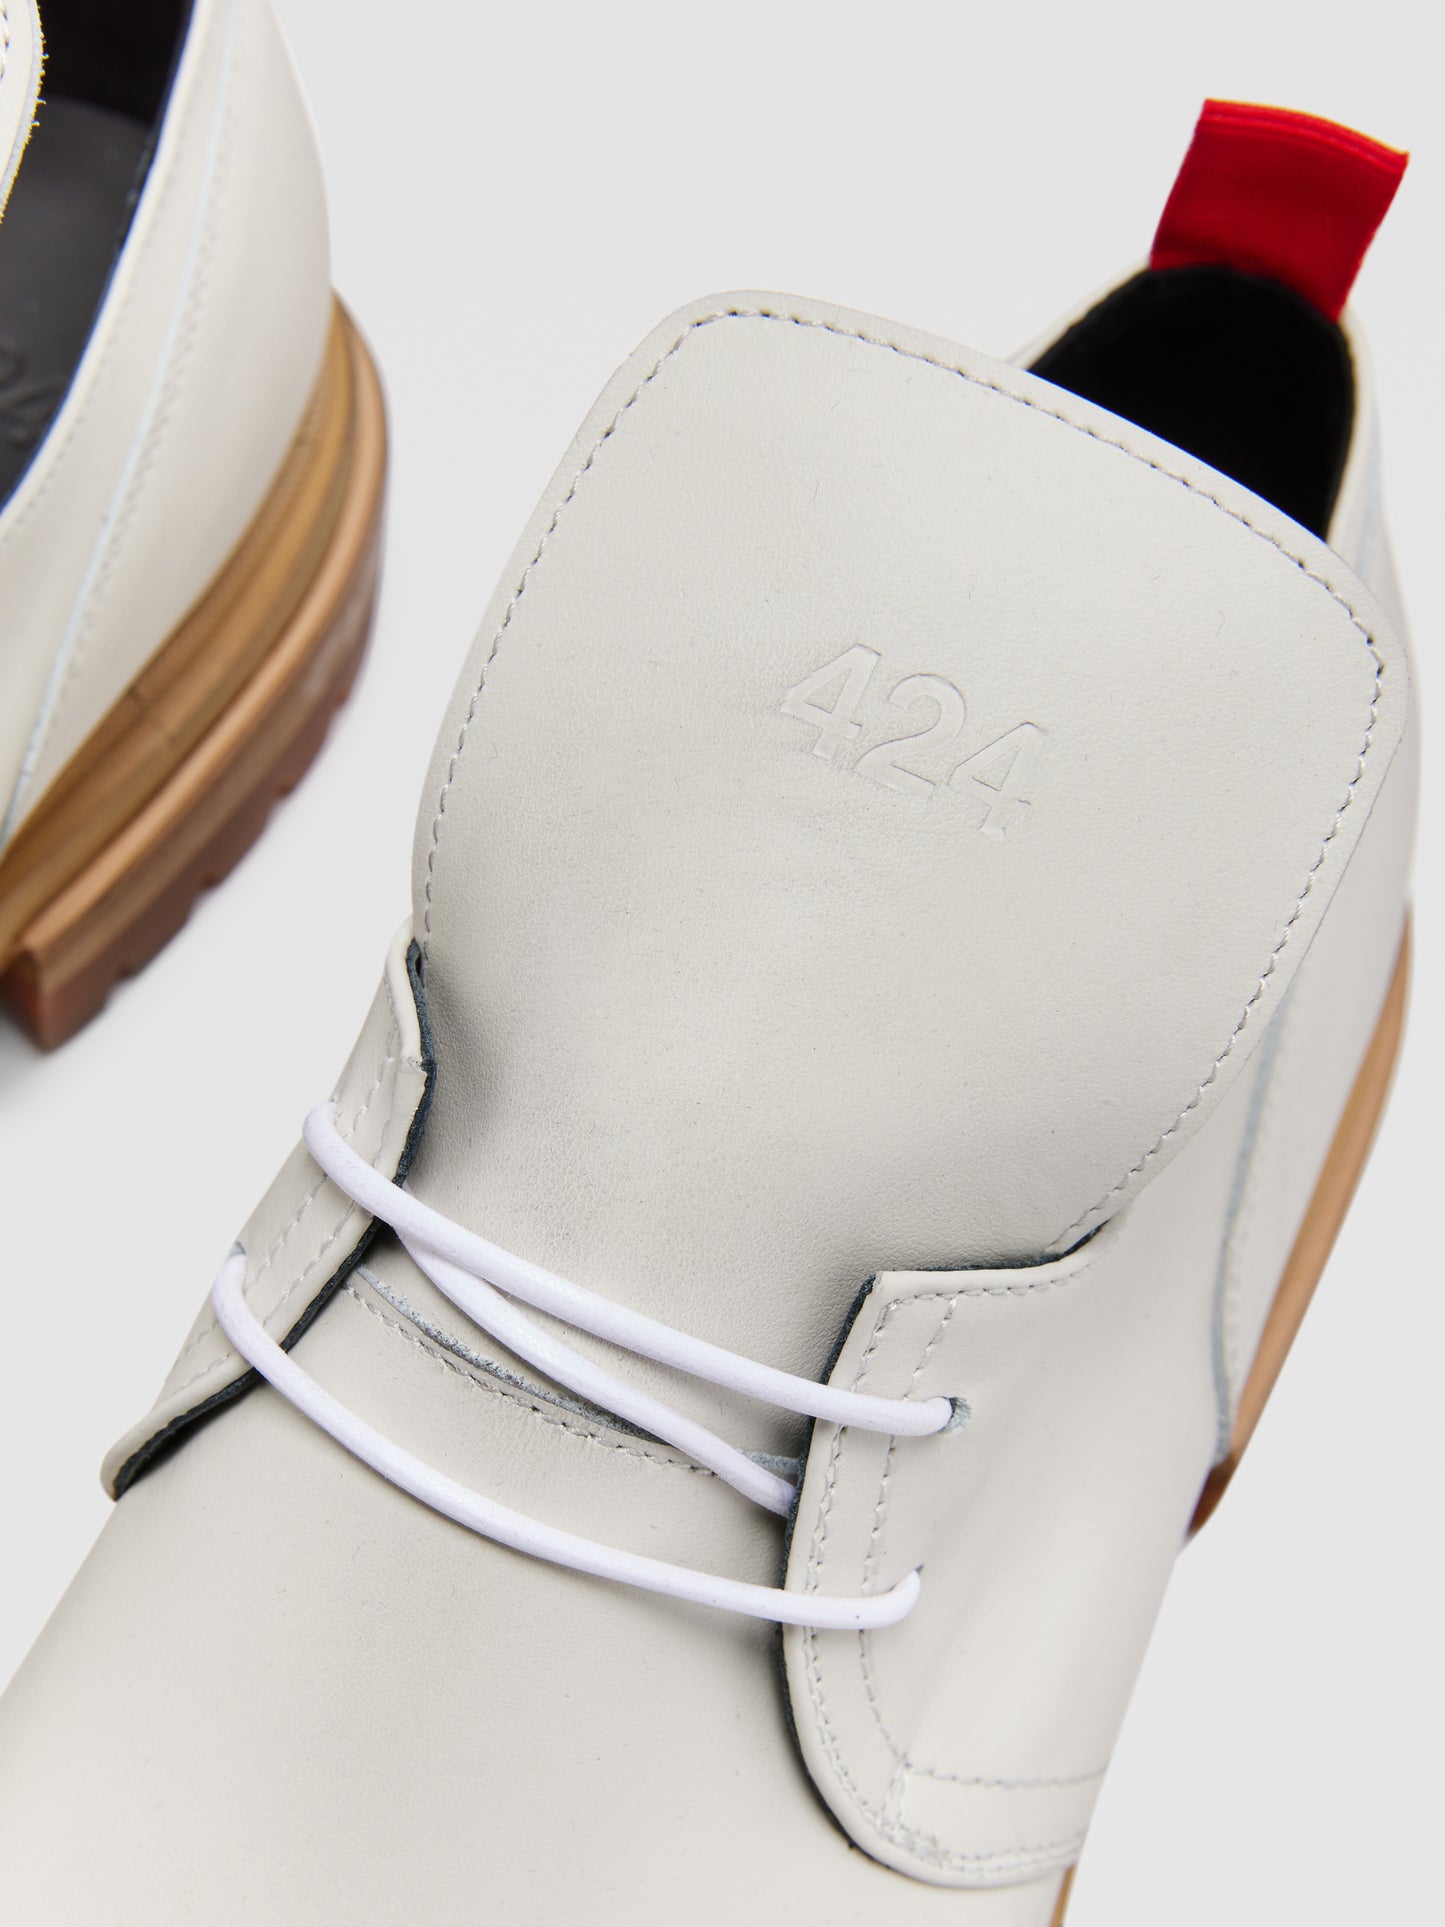 OFFWHITE LEATHER DERBYS